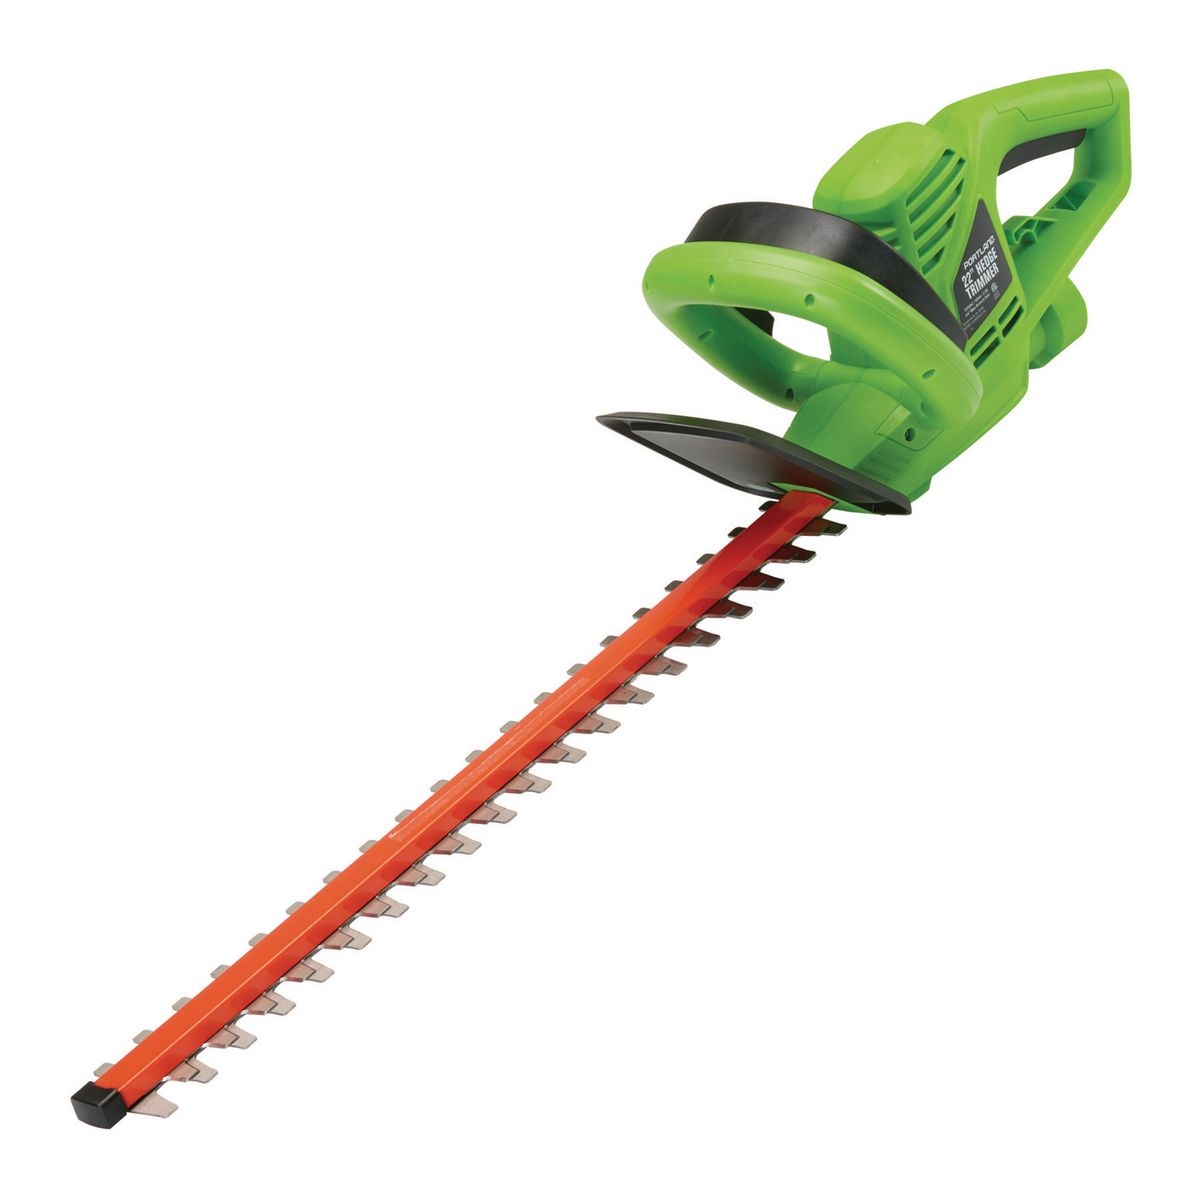 PORTLAND 22 in. Electric Hedge Trimmer - Item 62630 / 62339 / 63075